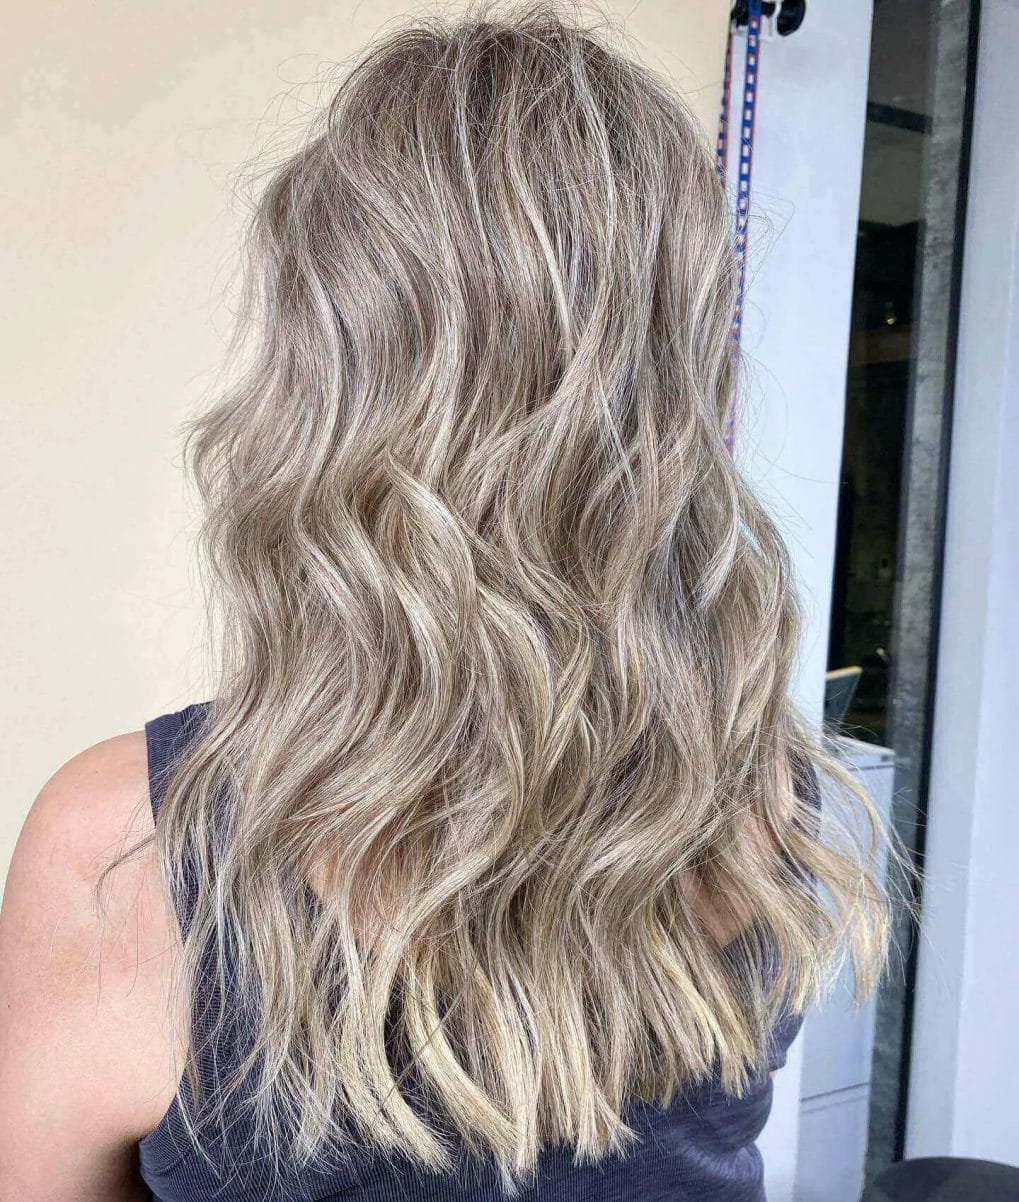 Layered waves mixing cool ash and warm blonde for a dynamic look.